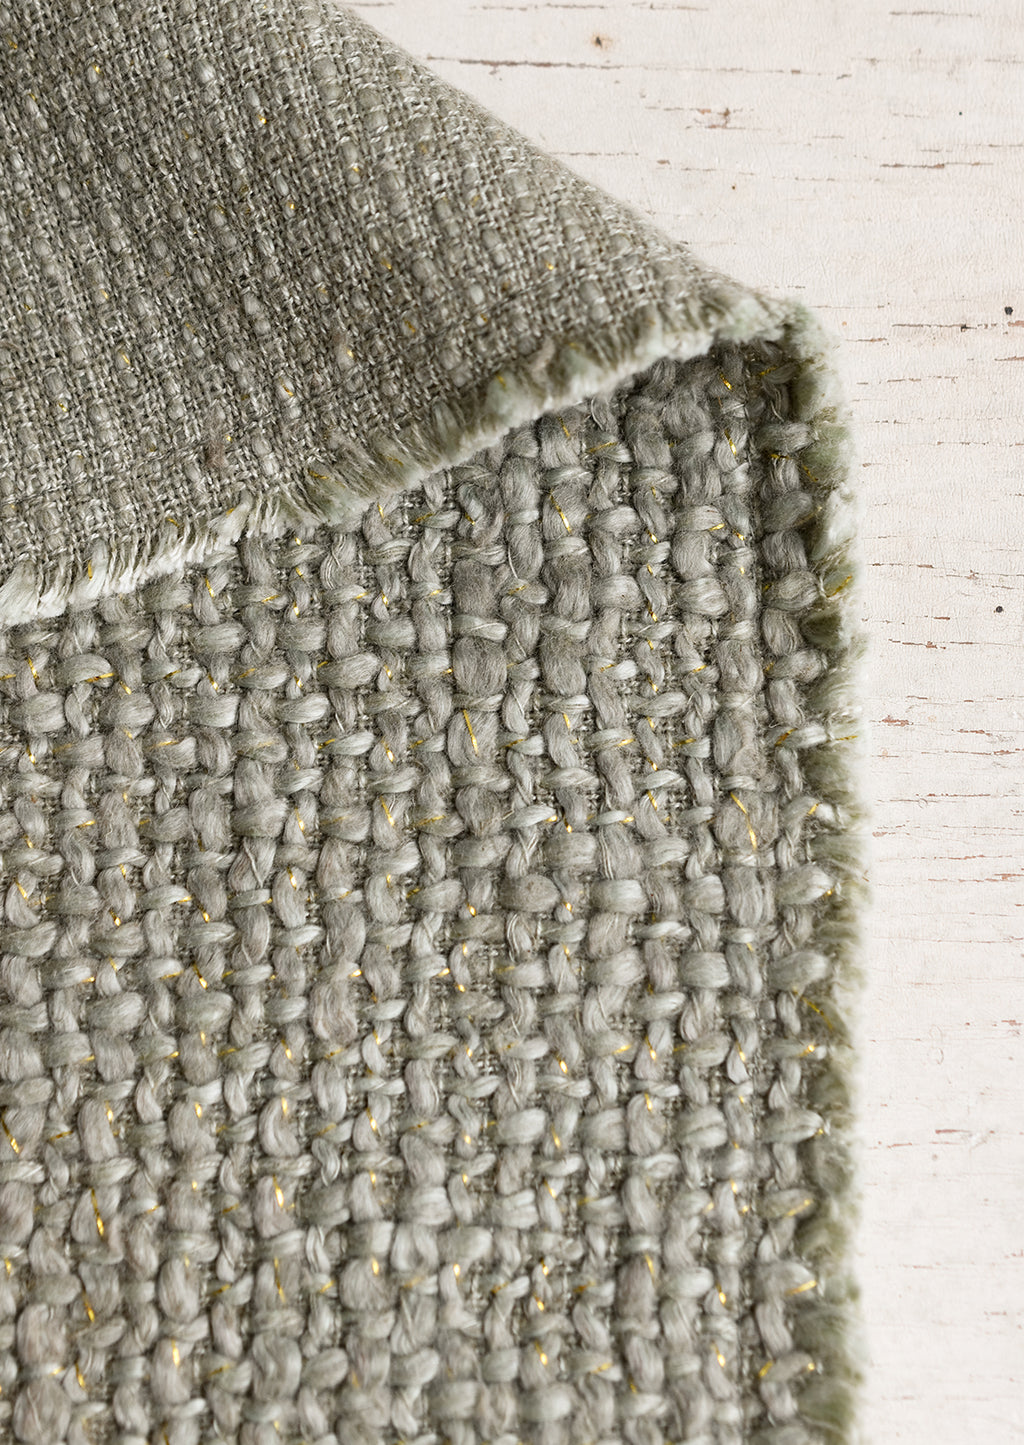 3: A sage green placemat with fringe edges.